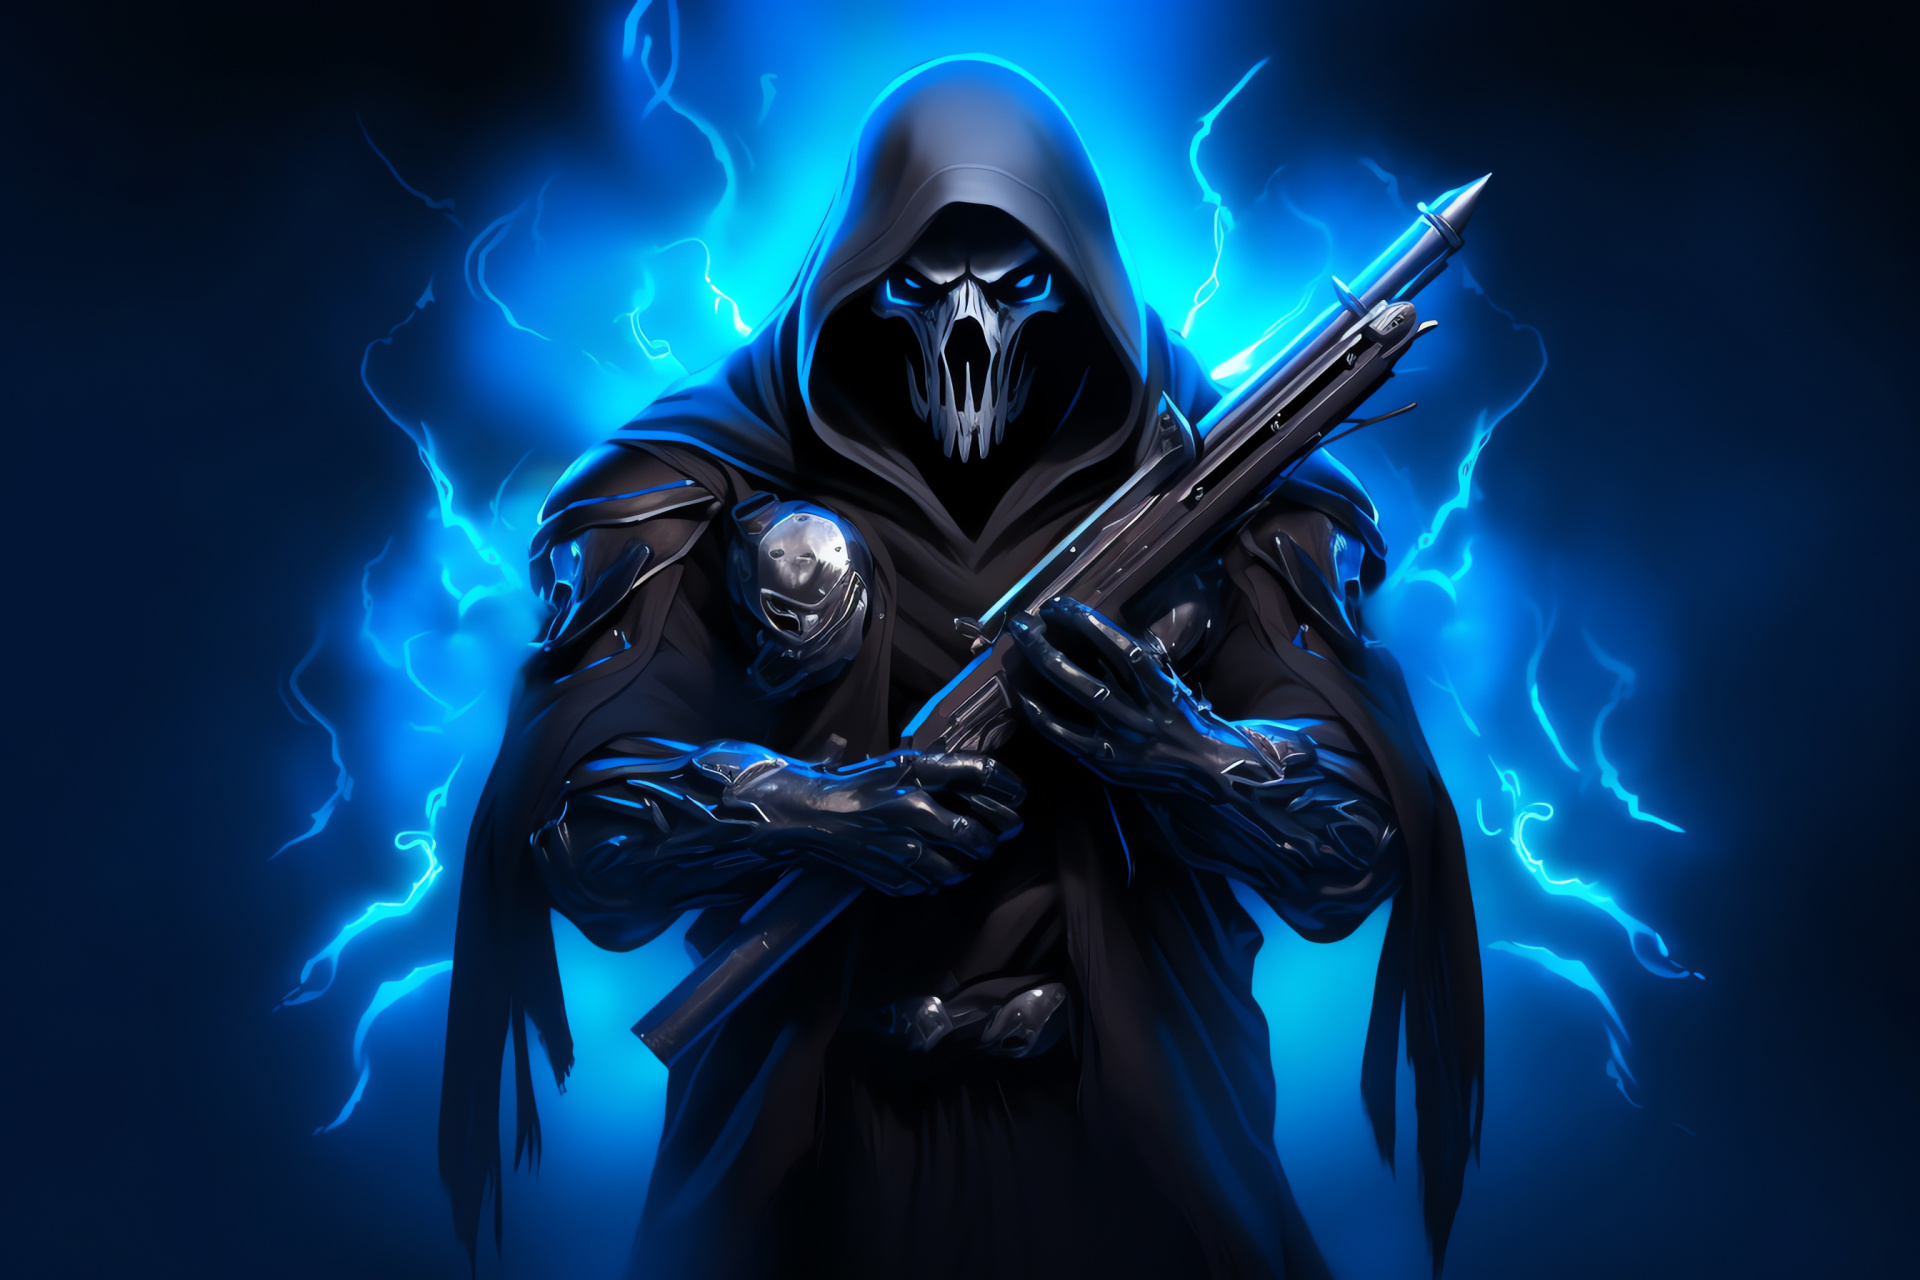 Reaper Overwatch entity, Shadowy game figure, Emblematic role, Armed aggression, Monochromatic expanse, HD Desktop Image